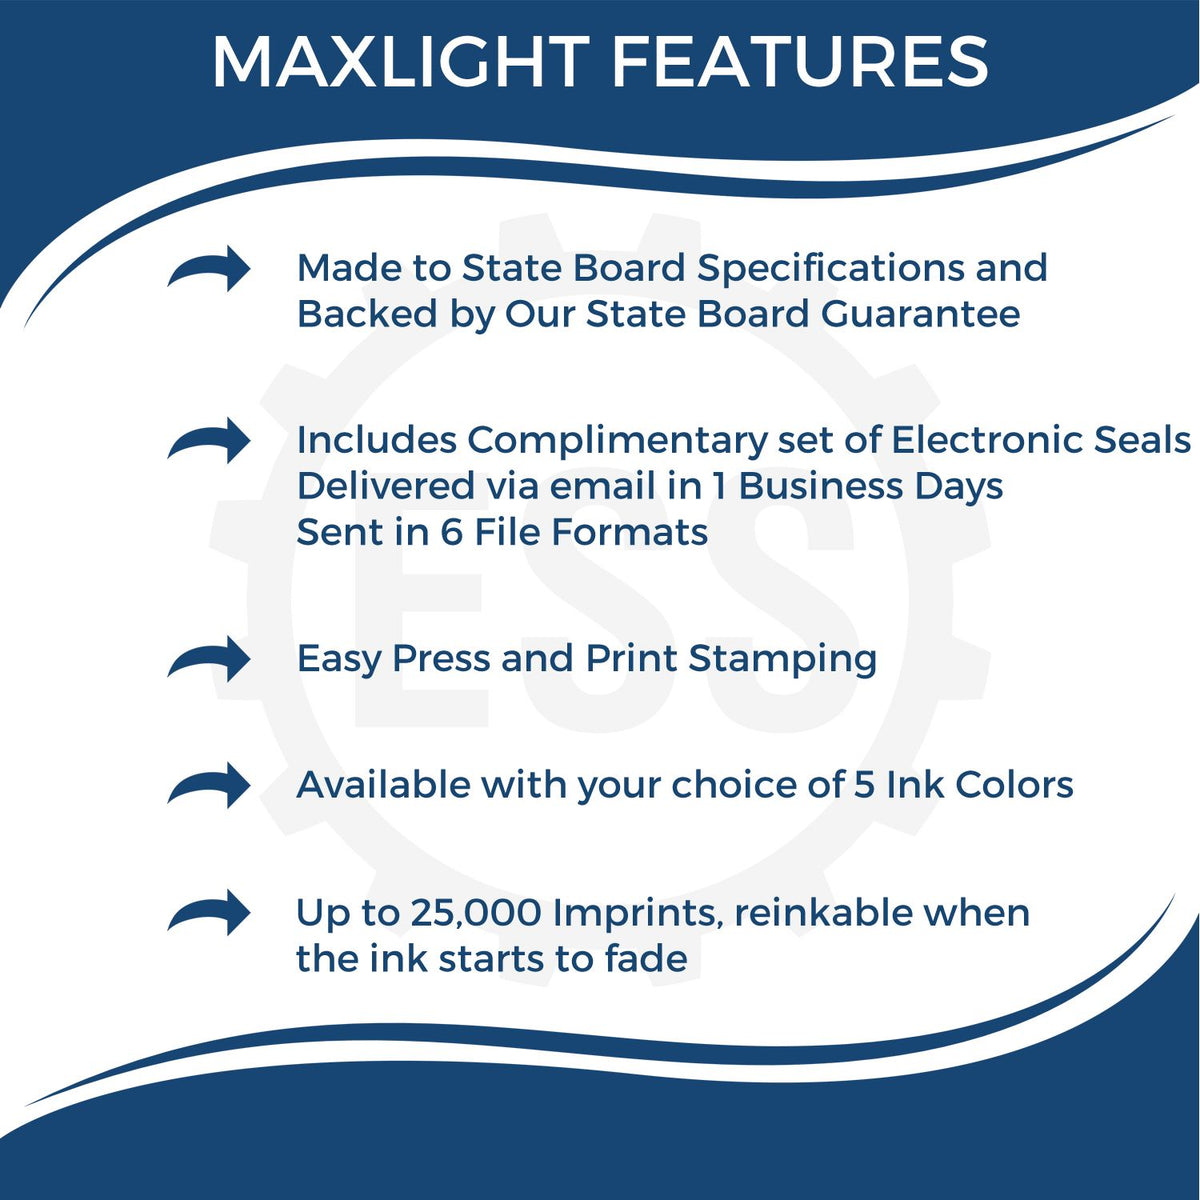 A picture of an infographic highlighting the selling points for the Premium MaxLight Pre-Inked Kansas Engineering Stamp